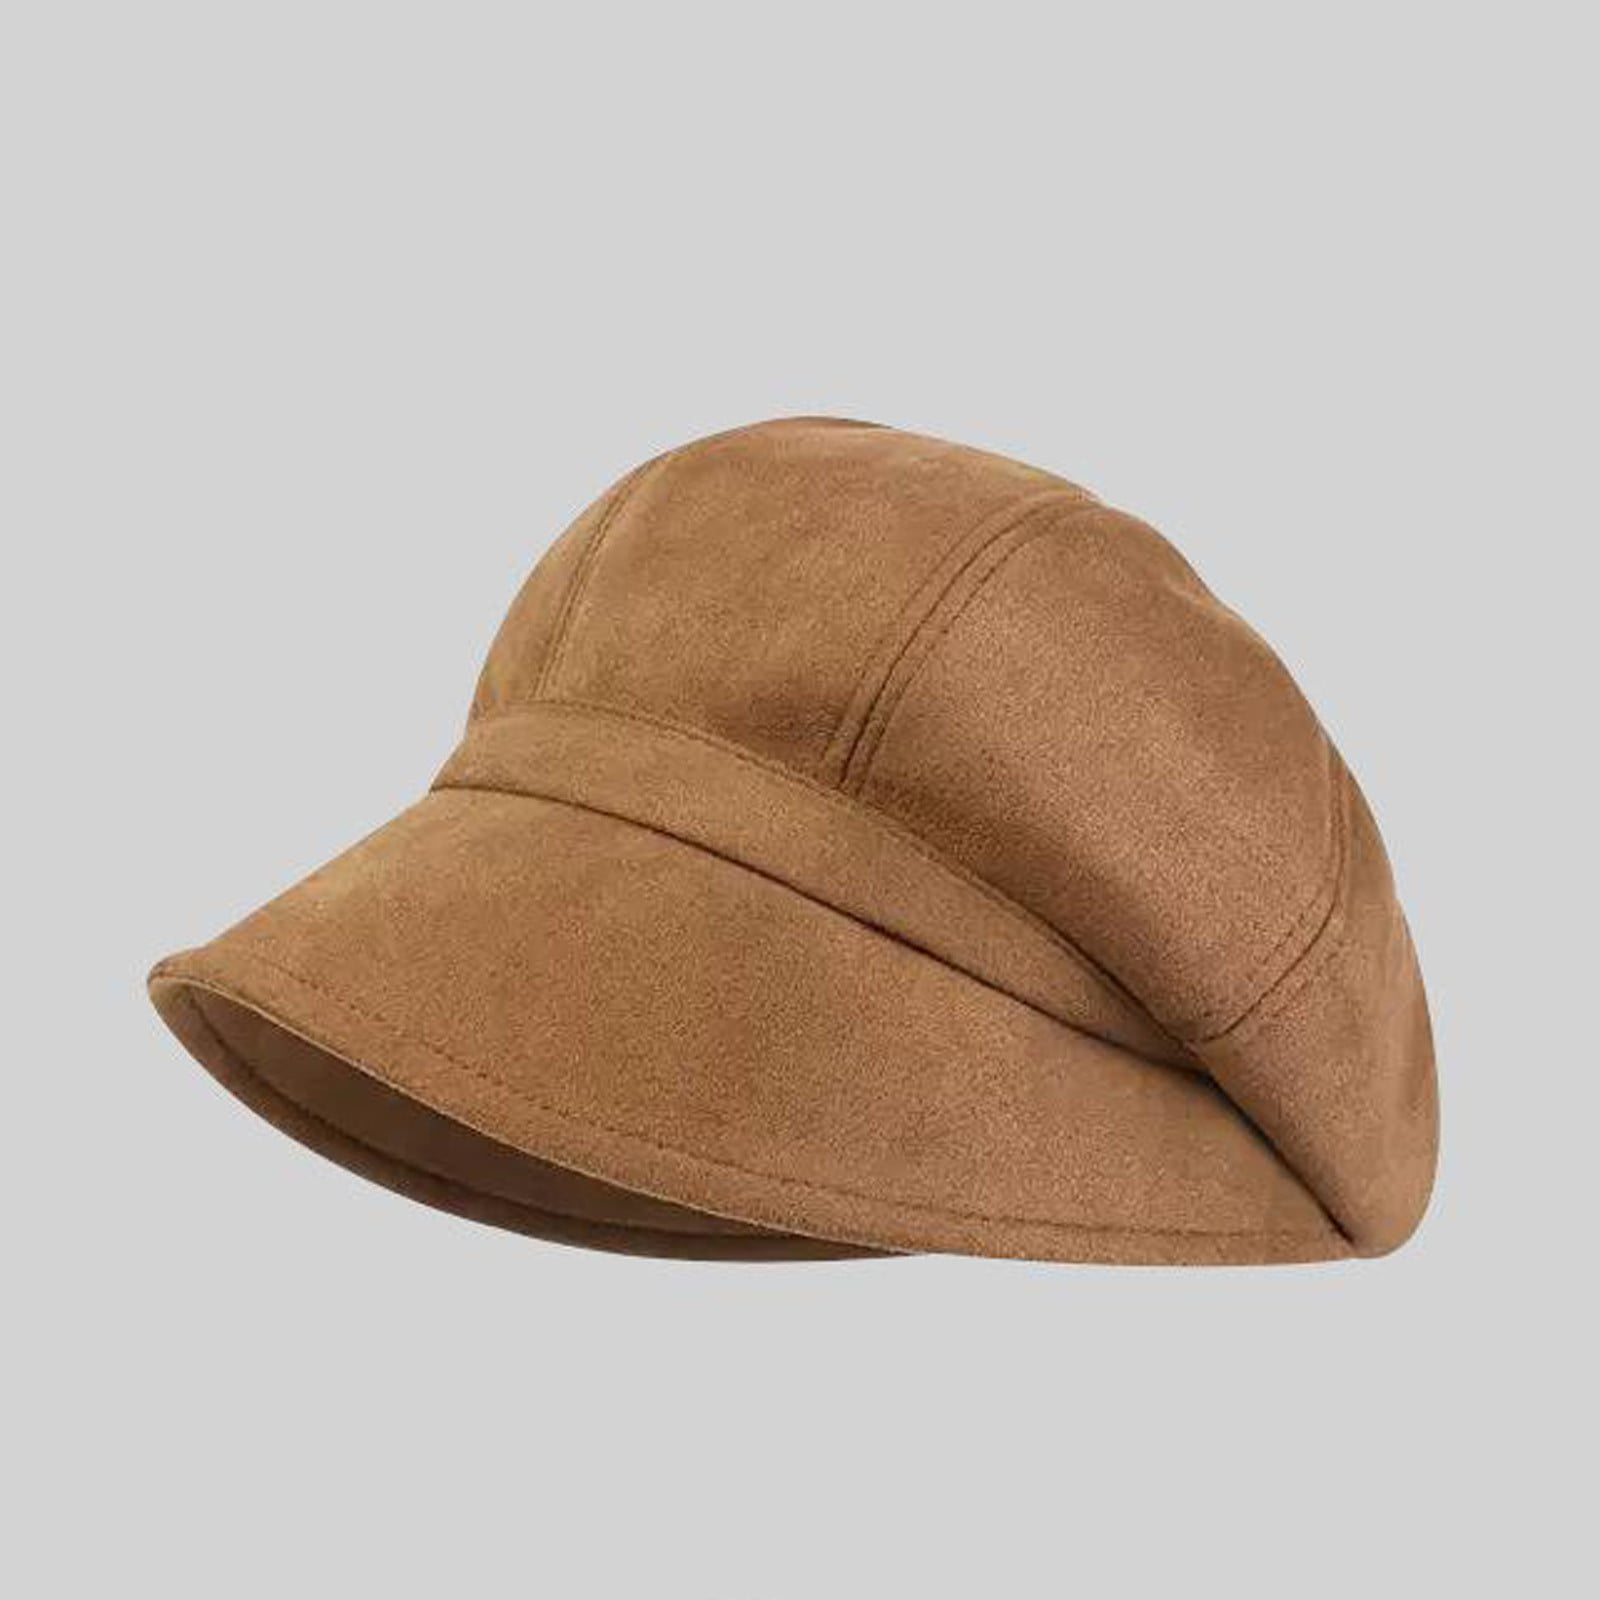 Shpwfbe Bucket Hat Mens Summer Outdoor Sun Protection Breathable Fisherman  Cap Foldable Hats For Men